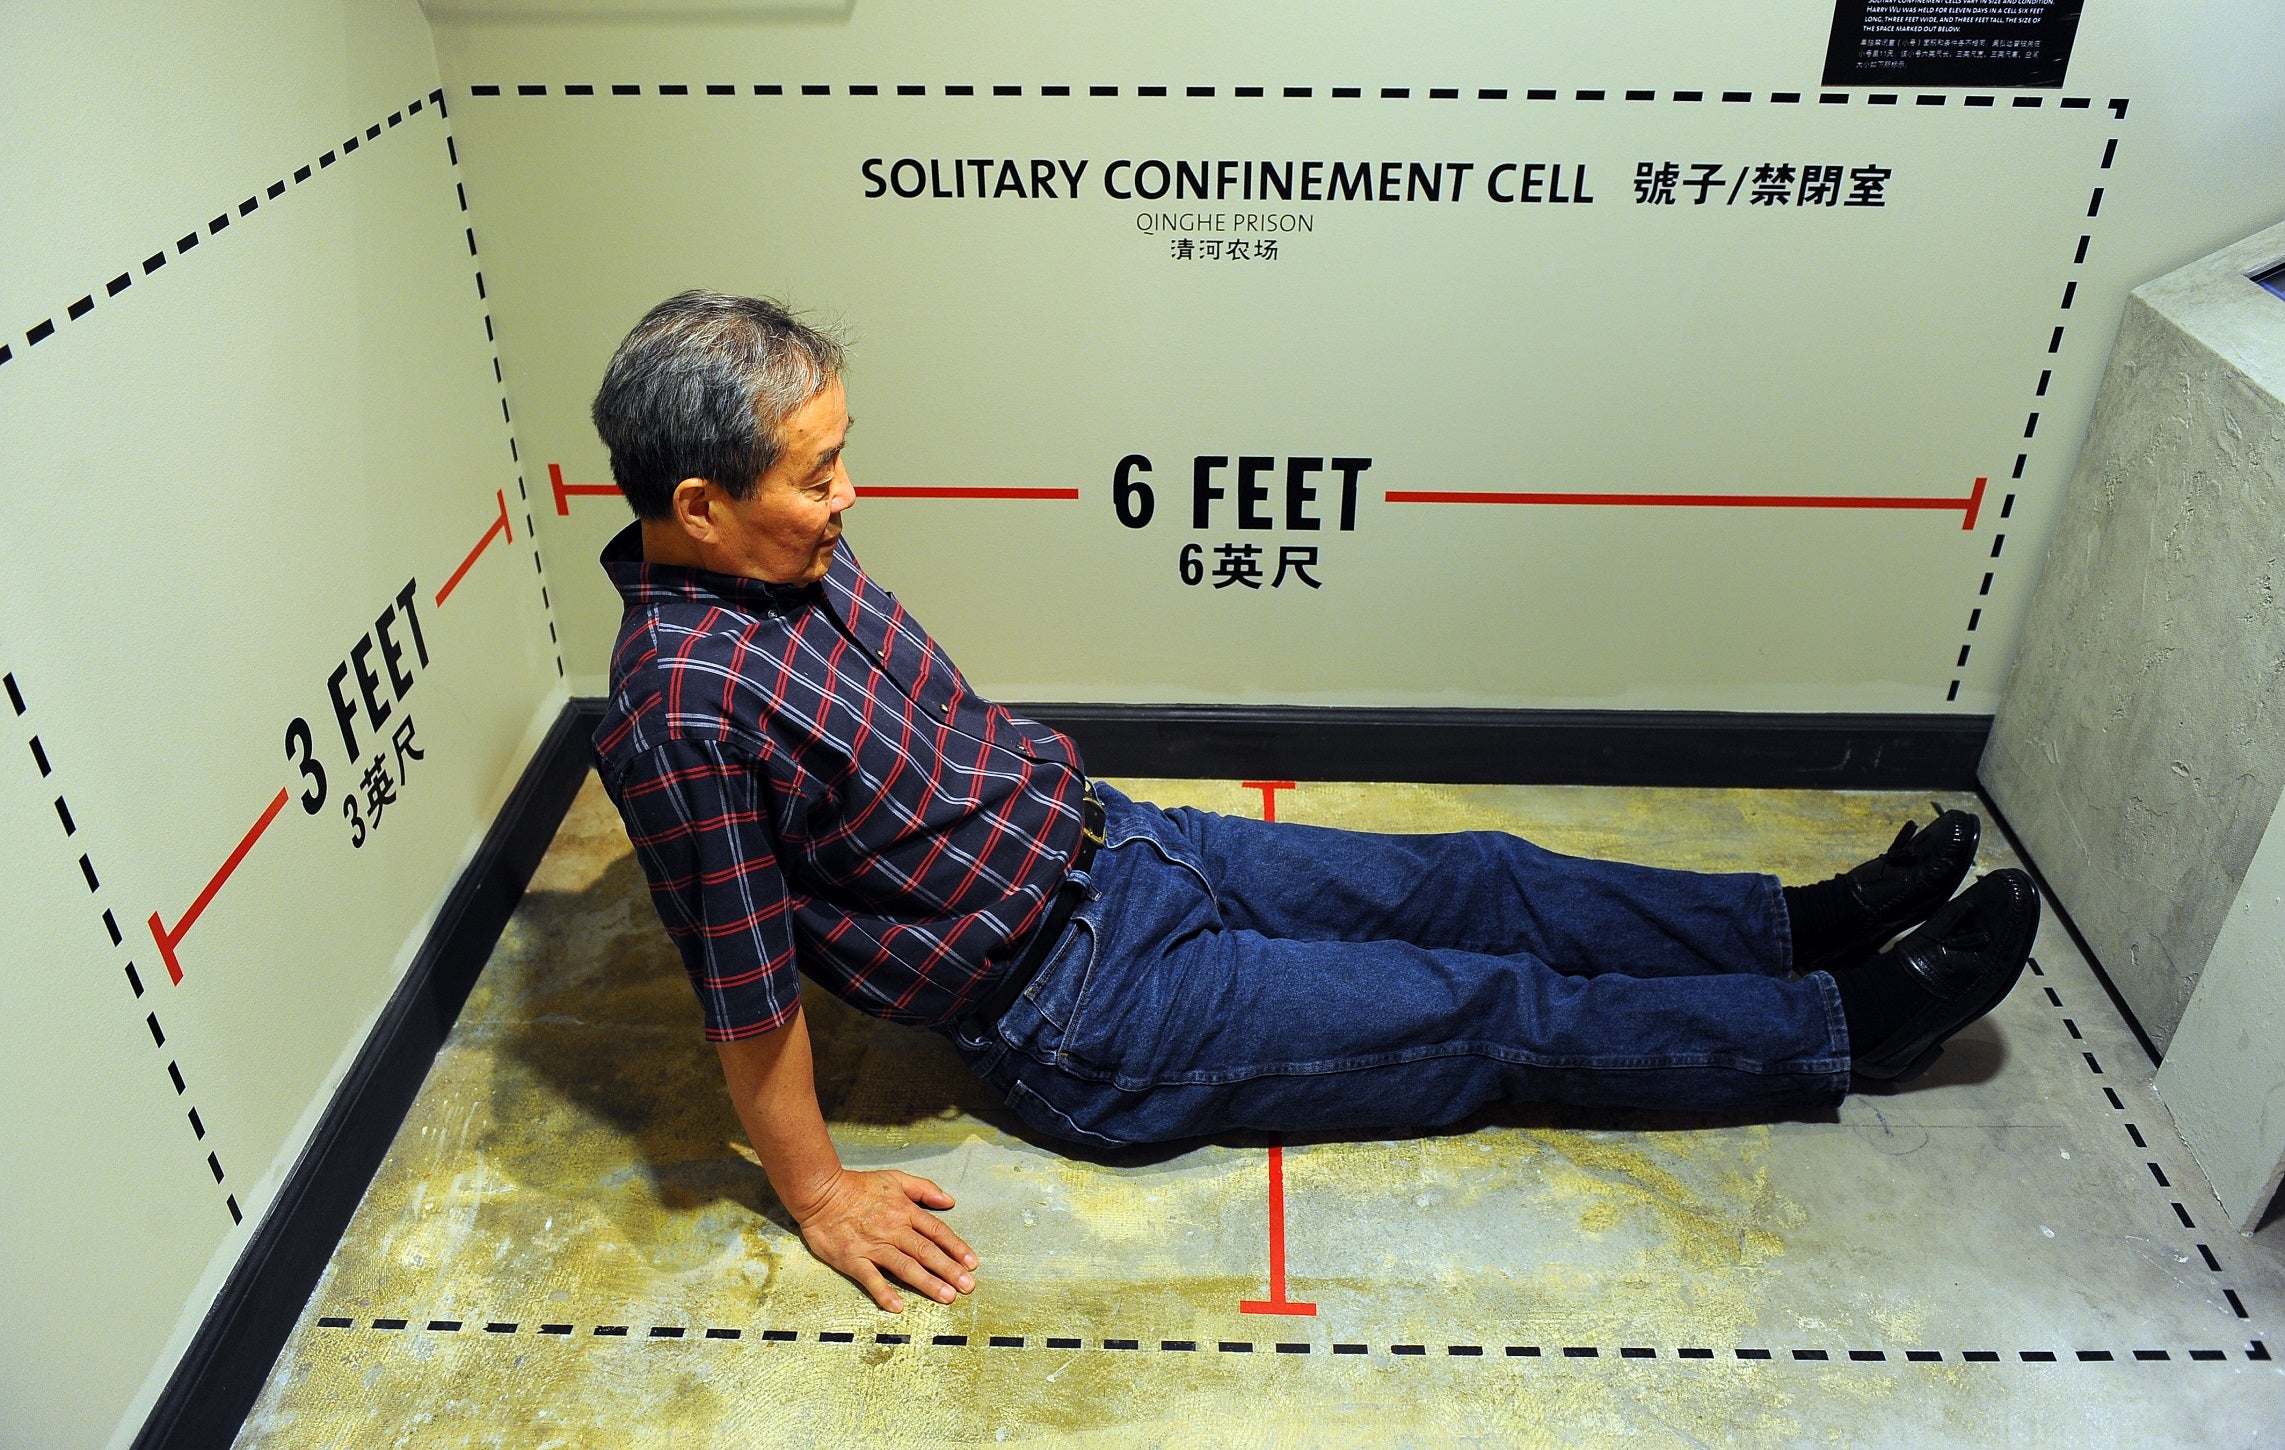 Harry Wu sits in an exhibit showing the exact dimensions of his solitary confinement cell where he spent 11 days at the labor prison camp which is on display at the Laogai Museum on June 20, 2011 in Washington, D.C.